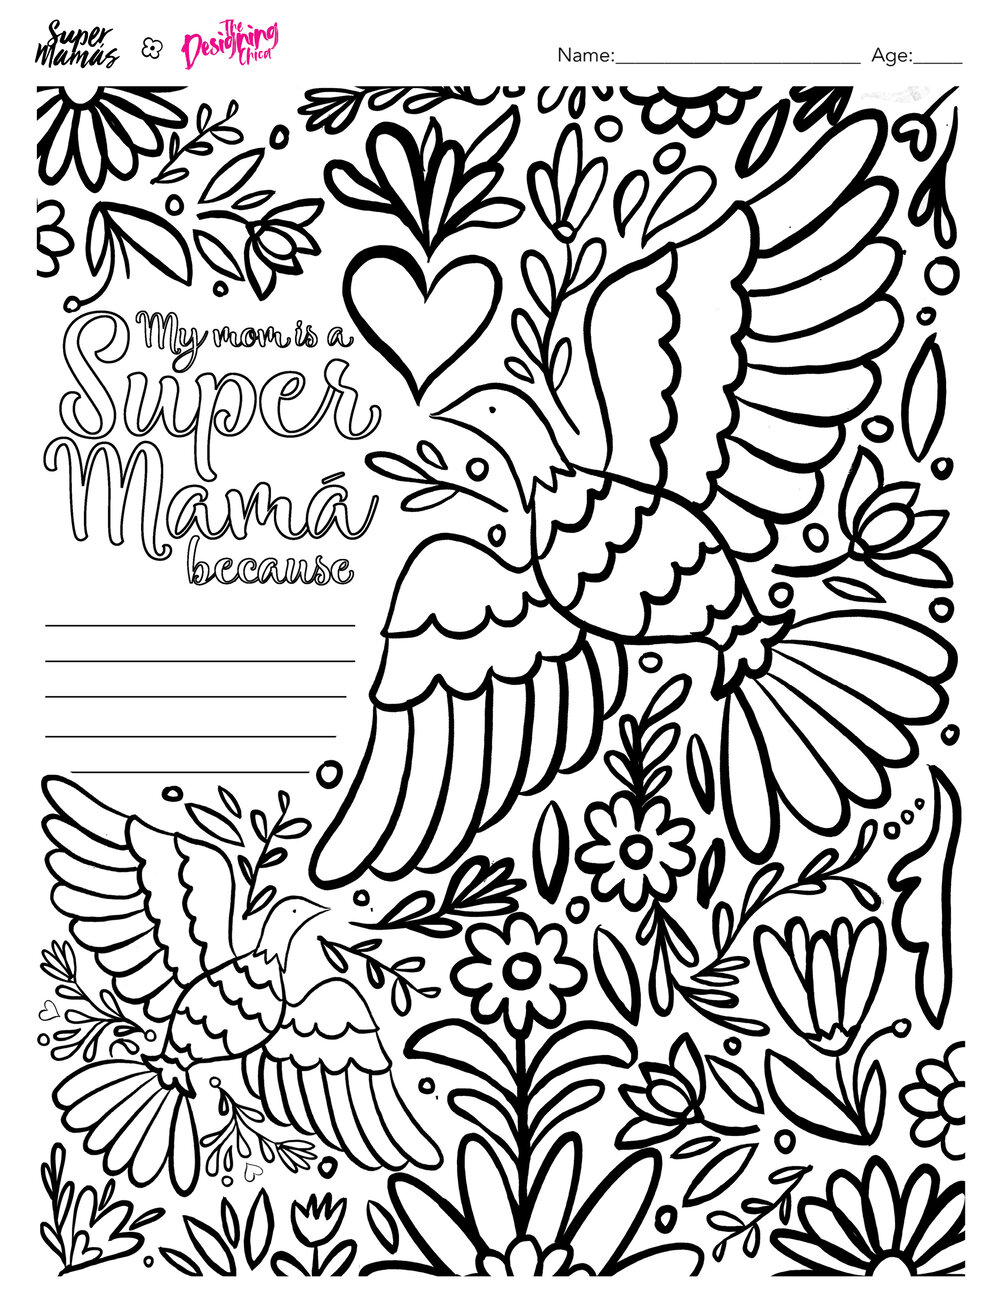 SUPER MAMAS Coloring pages2.jpg